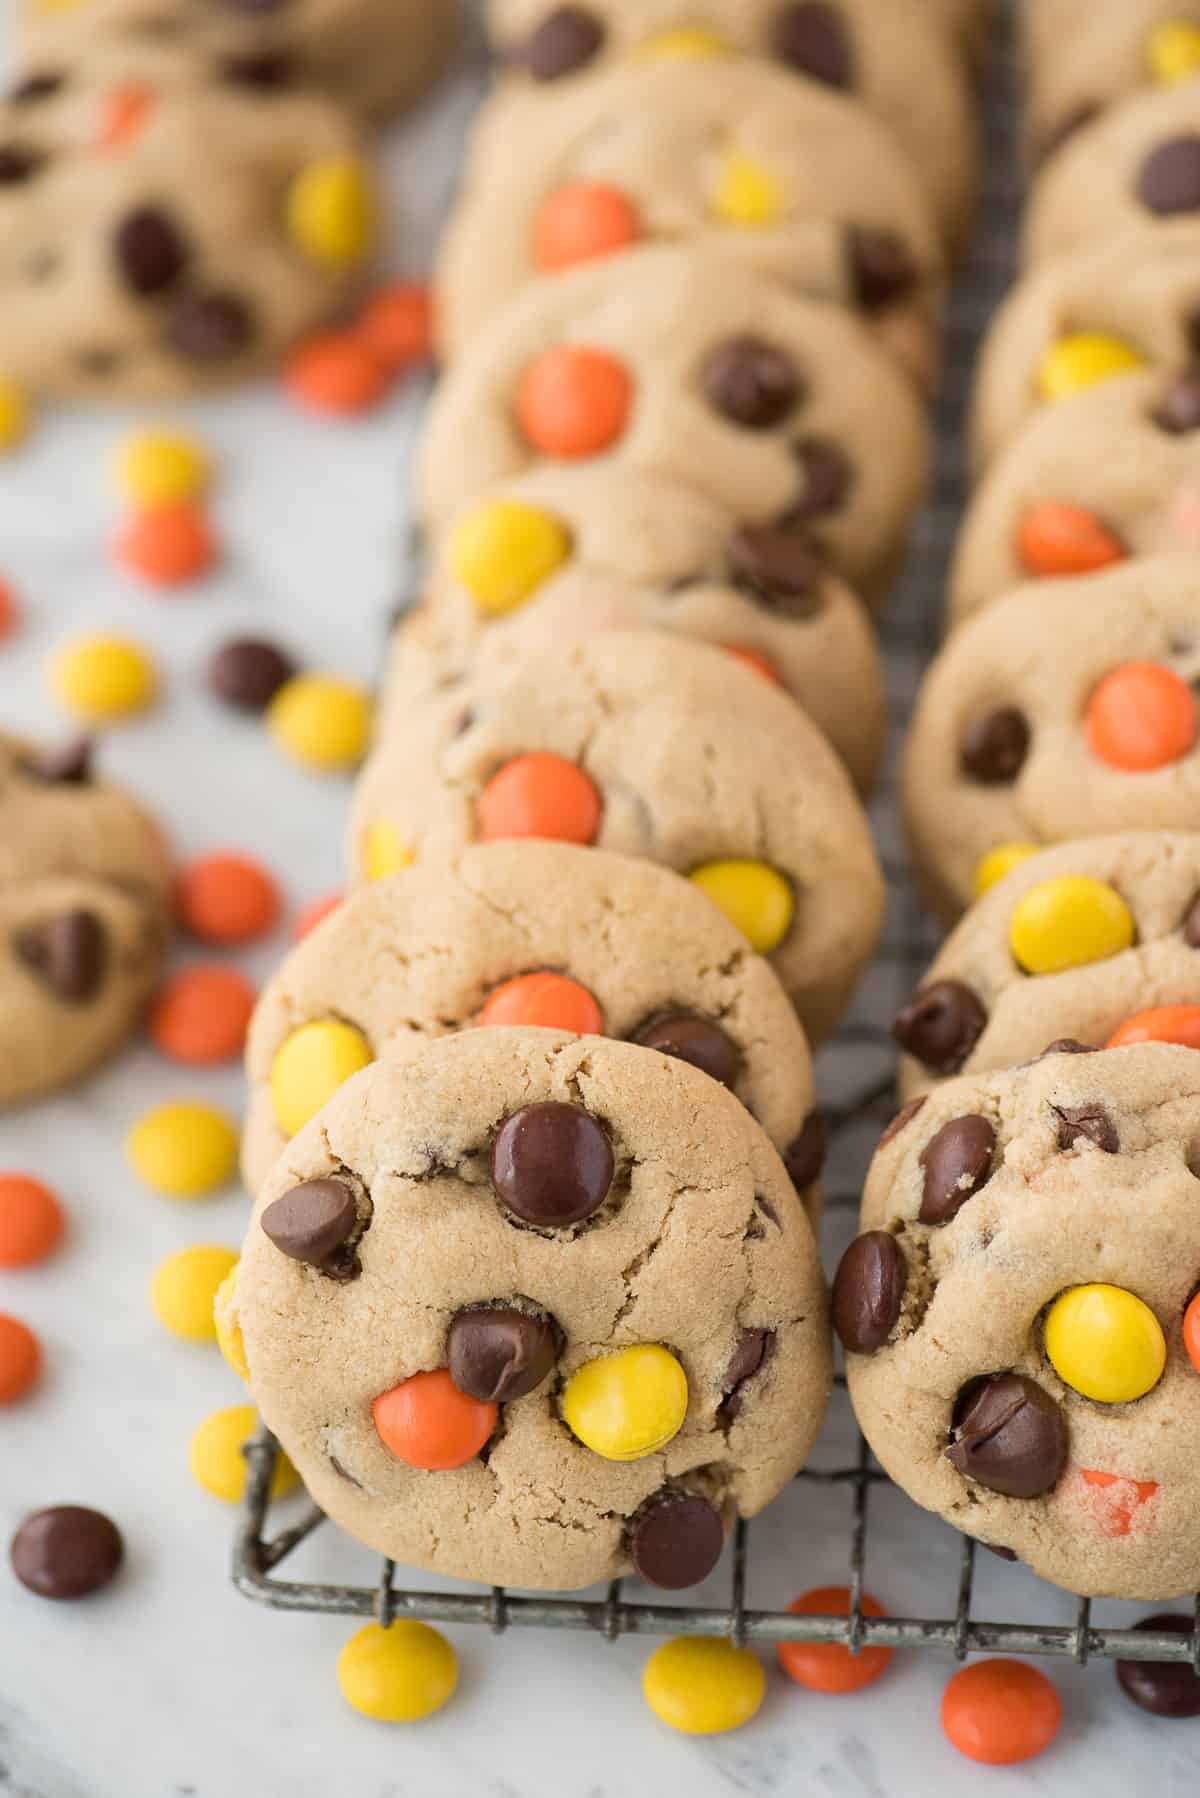 peanut butter cookies with reese's pieces candies and chocolate chips on white background